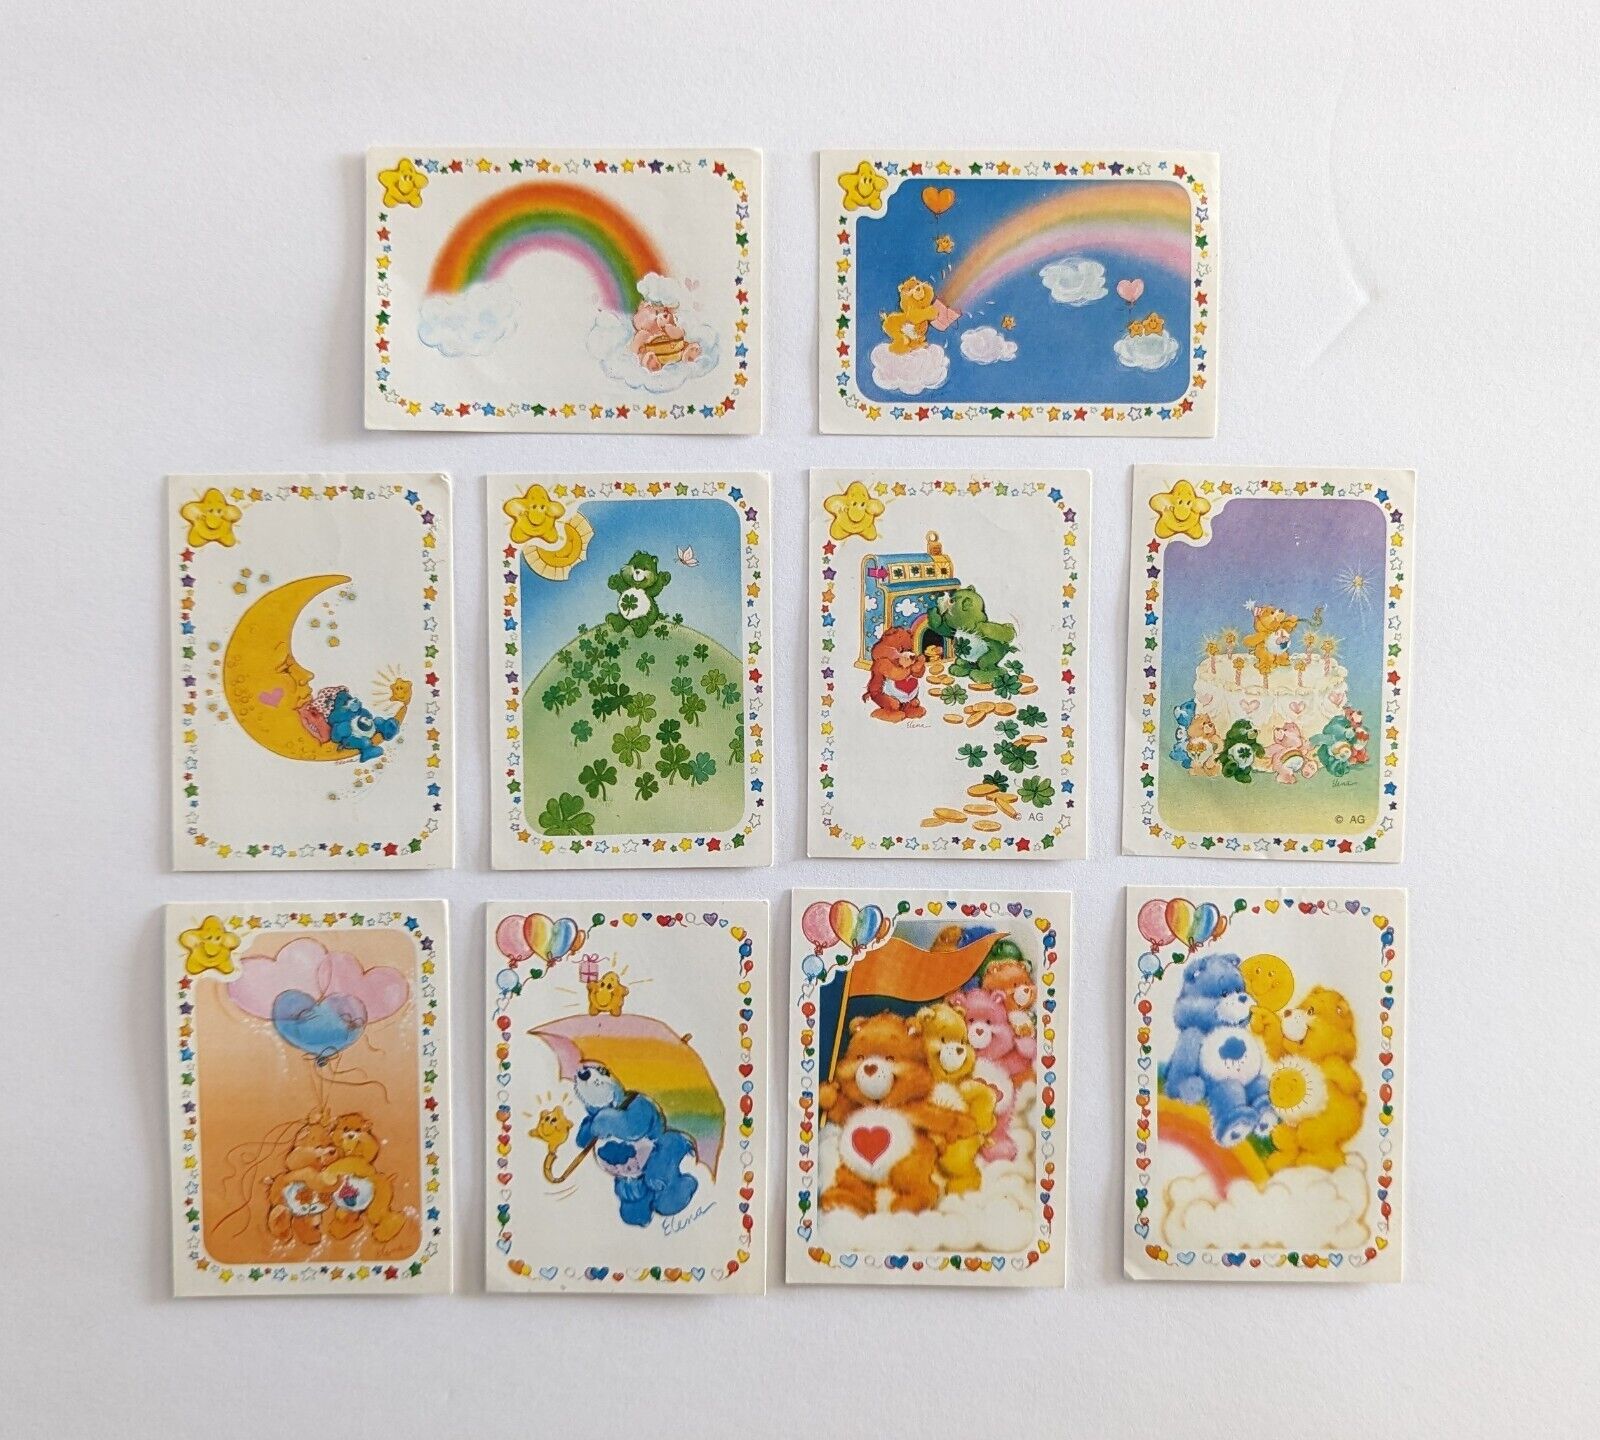 Care Bears Vintage 1985 Panini Sticker Lot of 10 Stickers